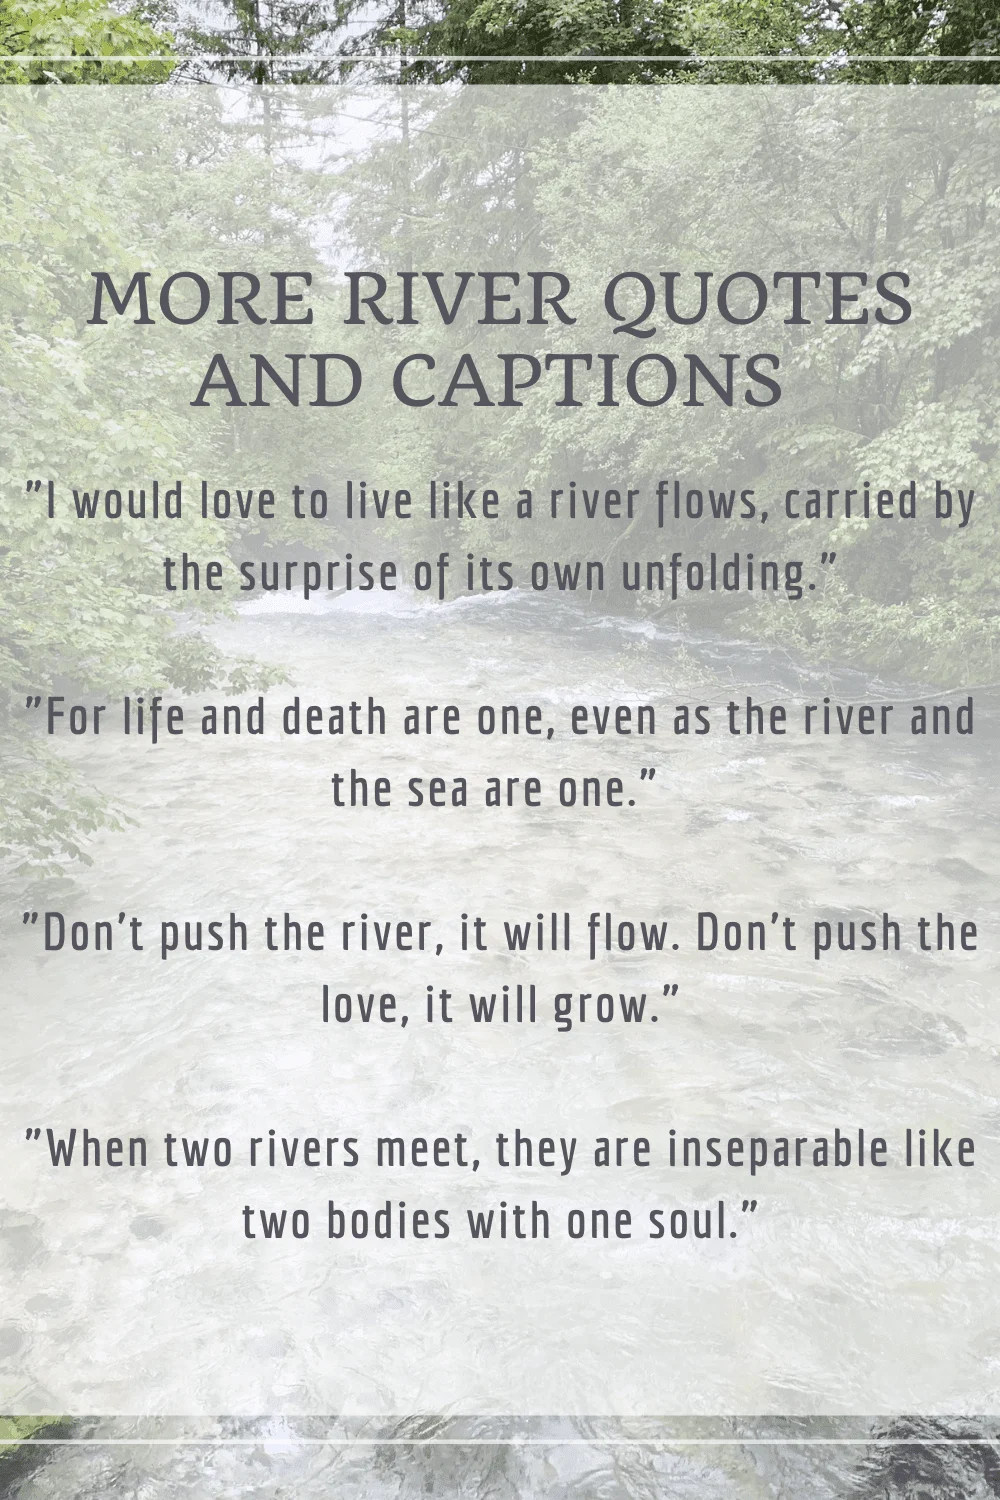 River Quotes and Captions 